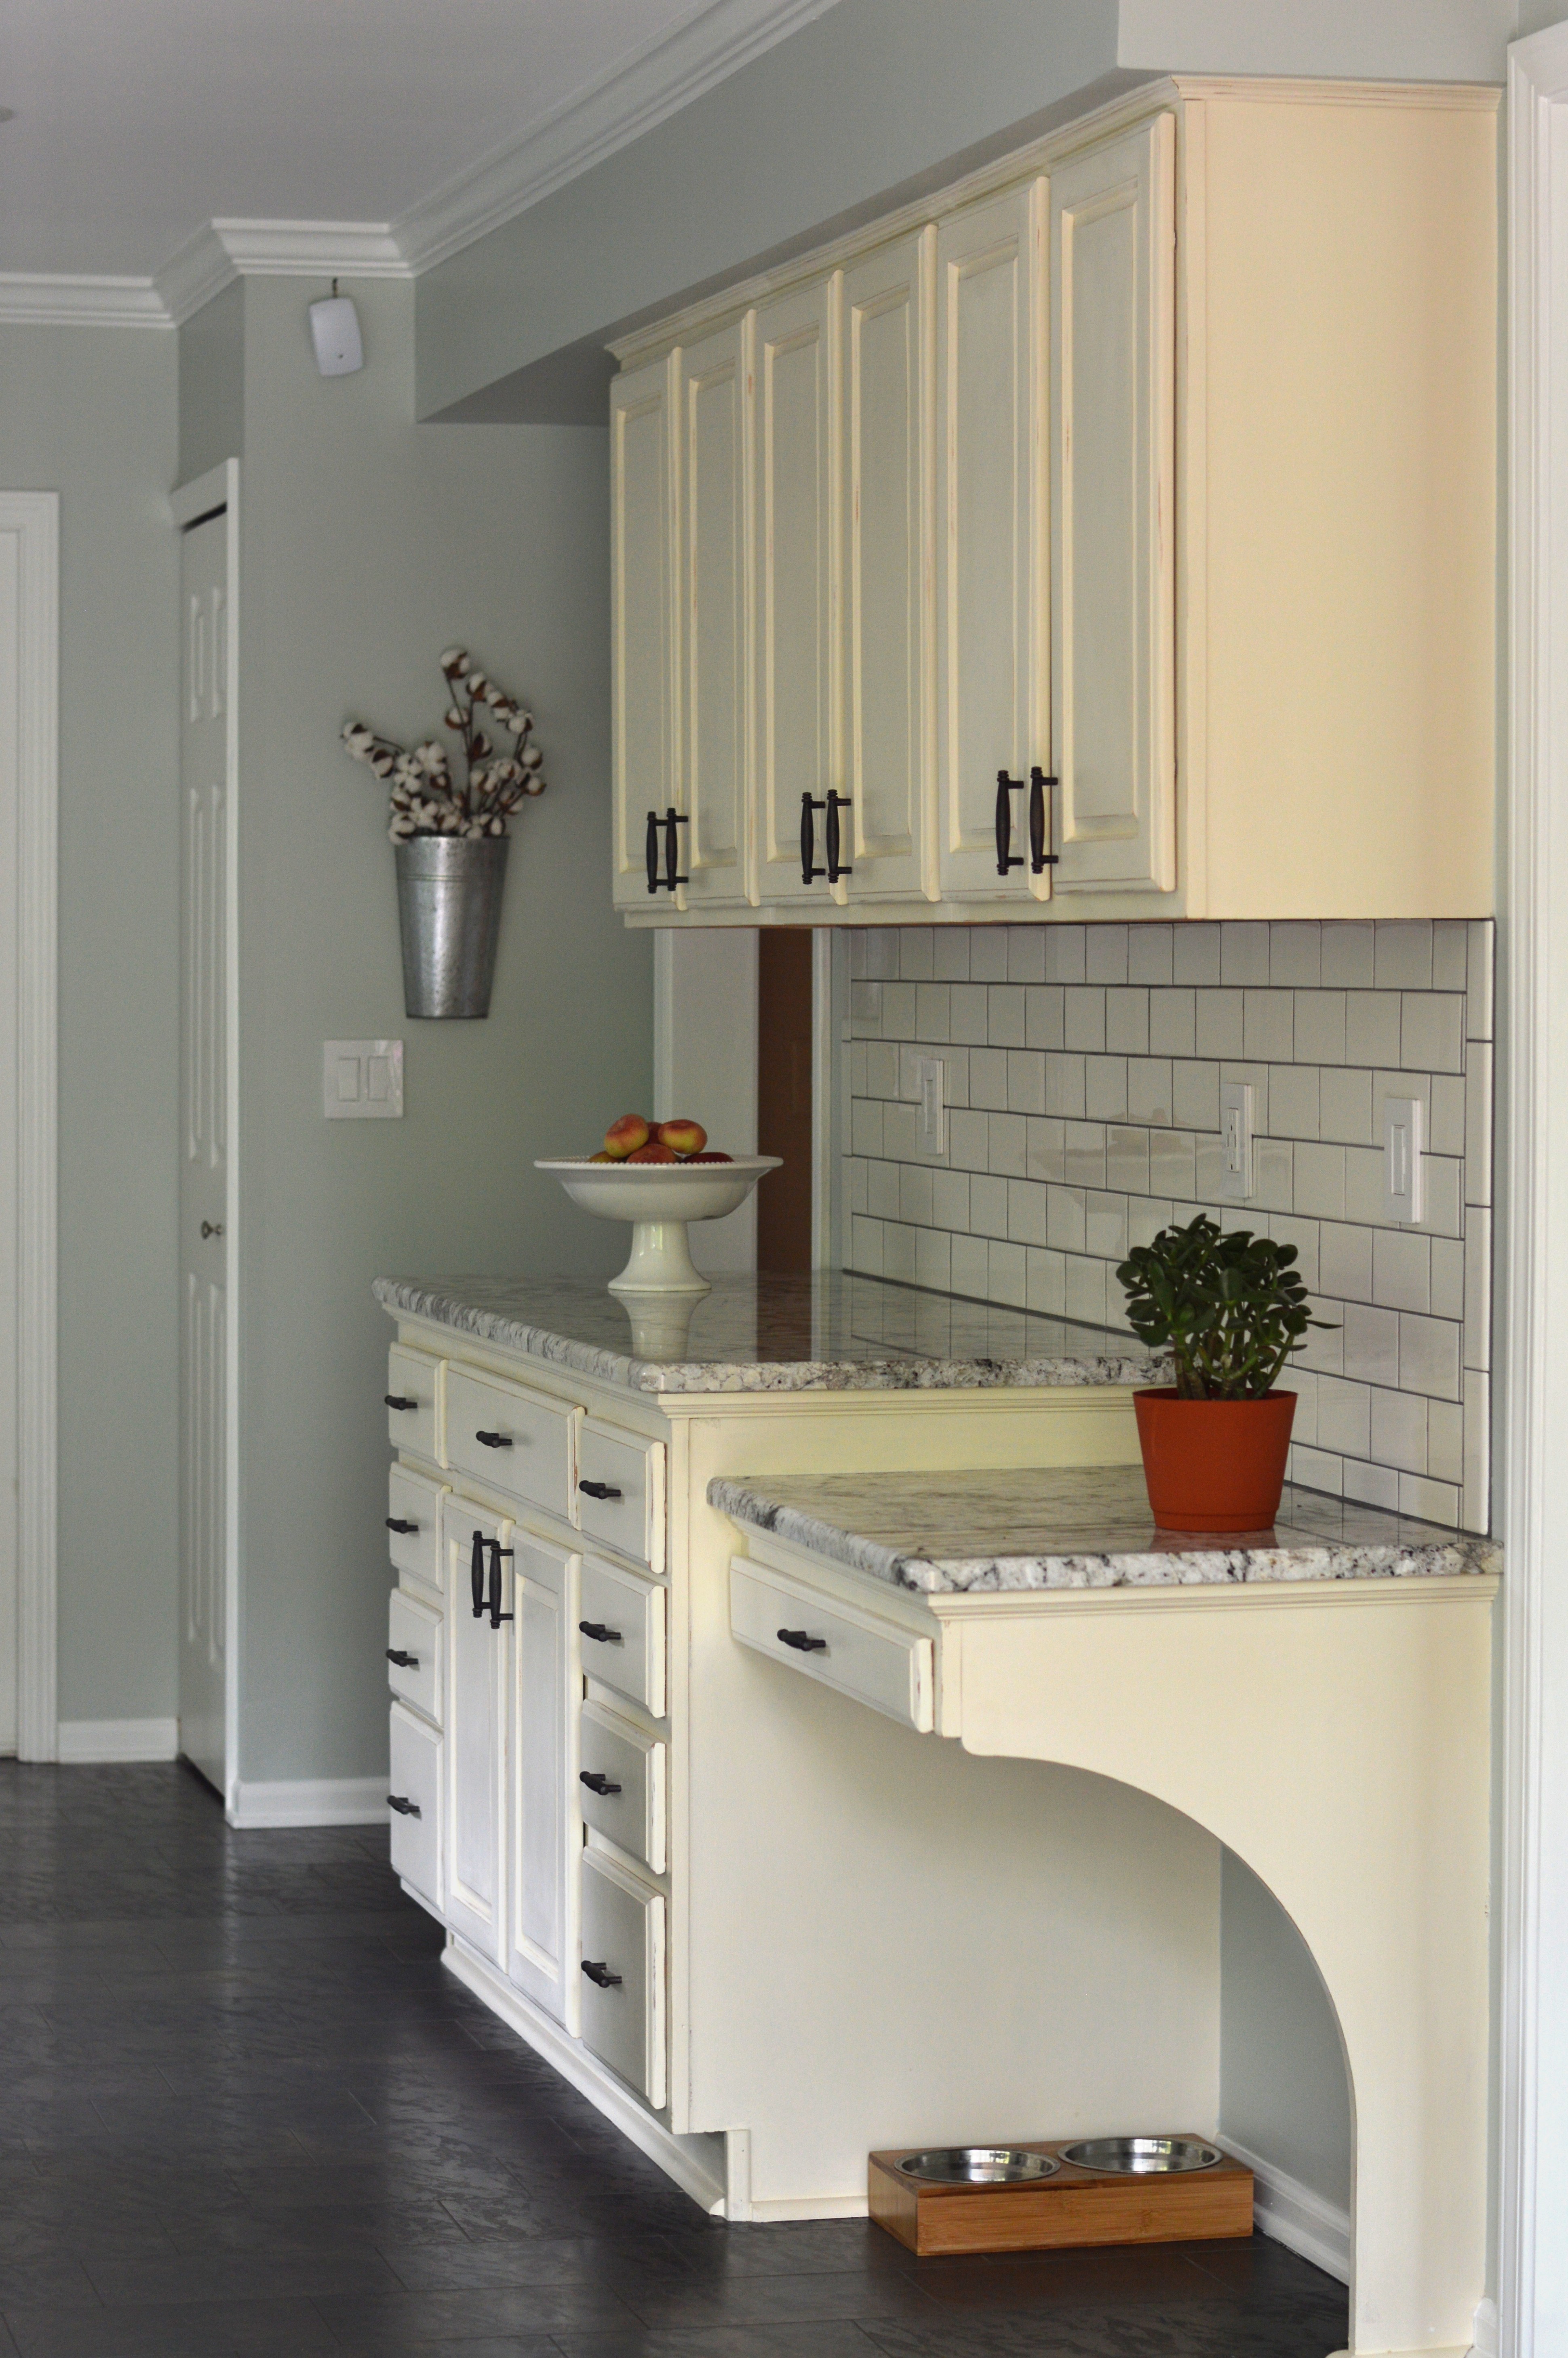 Annie Sloan Chalk Paint & Waxed Kitchen Cabinets 7 Month Review ..